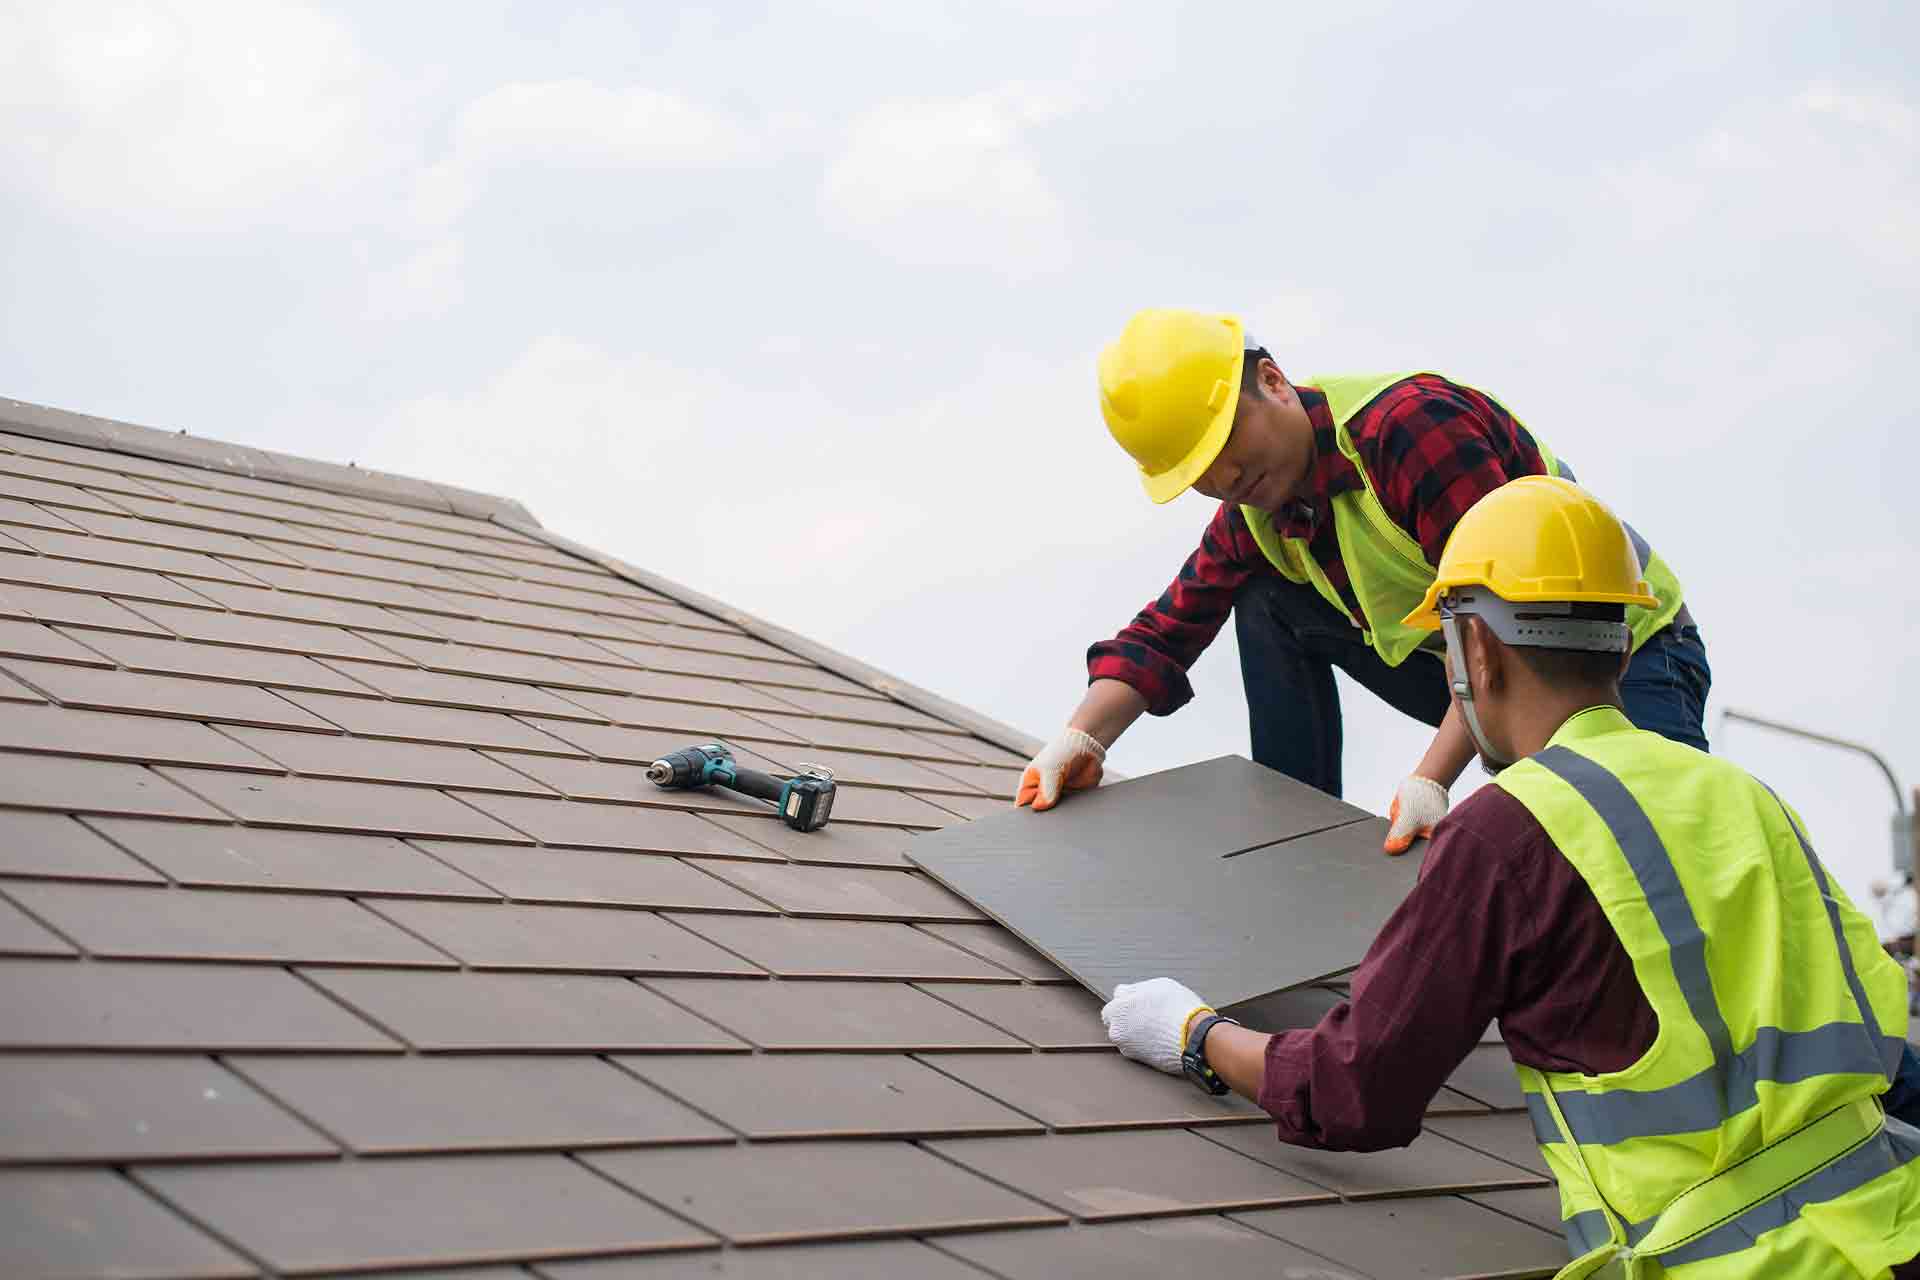 Acquiring Knowledge on the Price of Shingle Roofing in South Florida